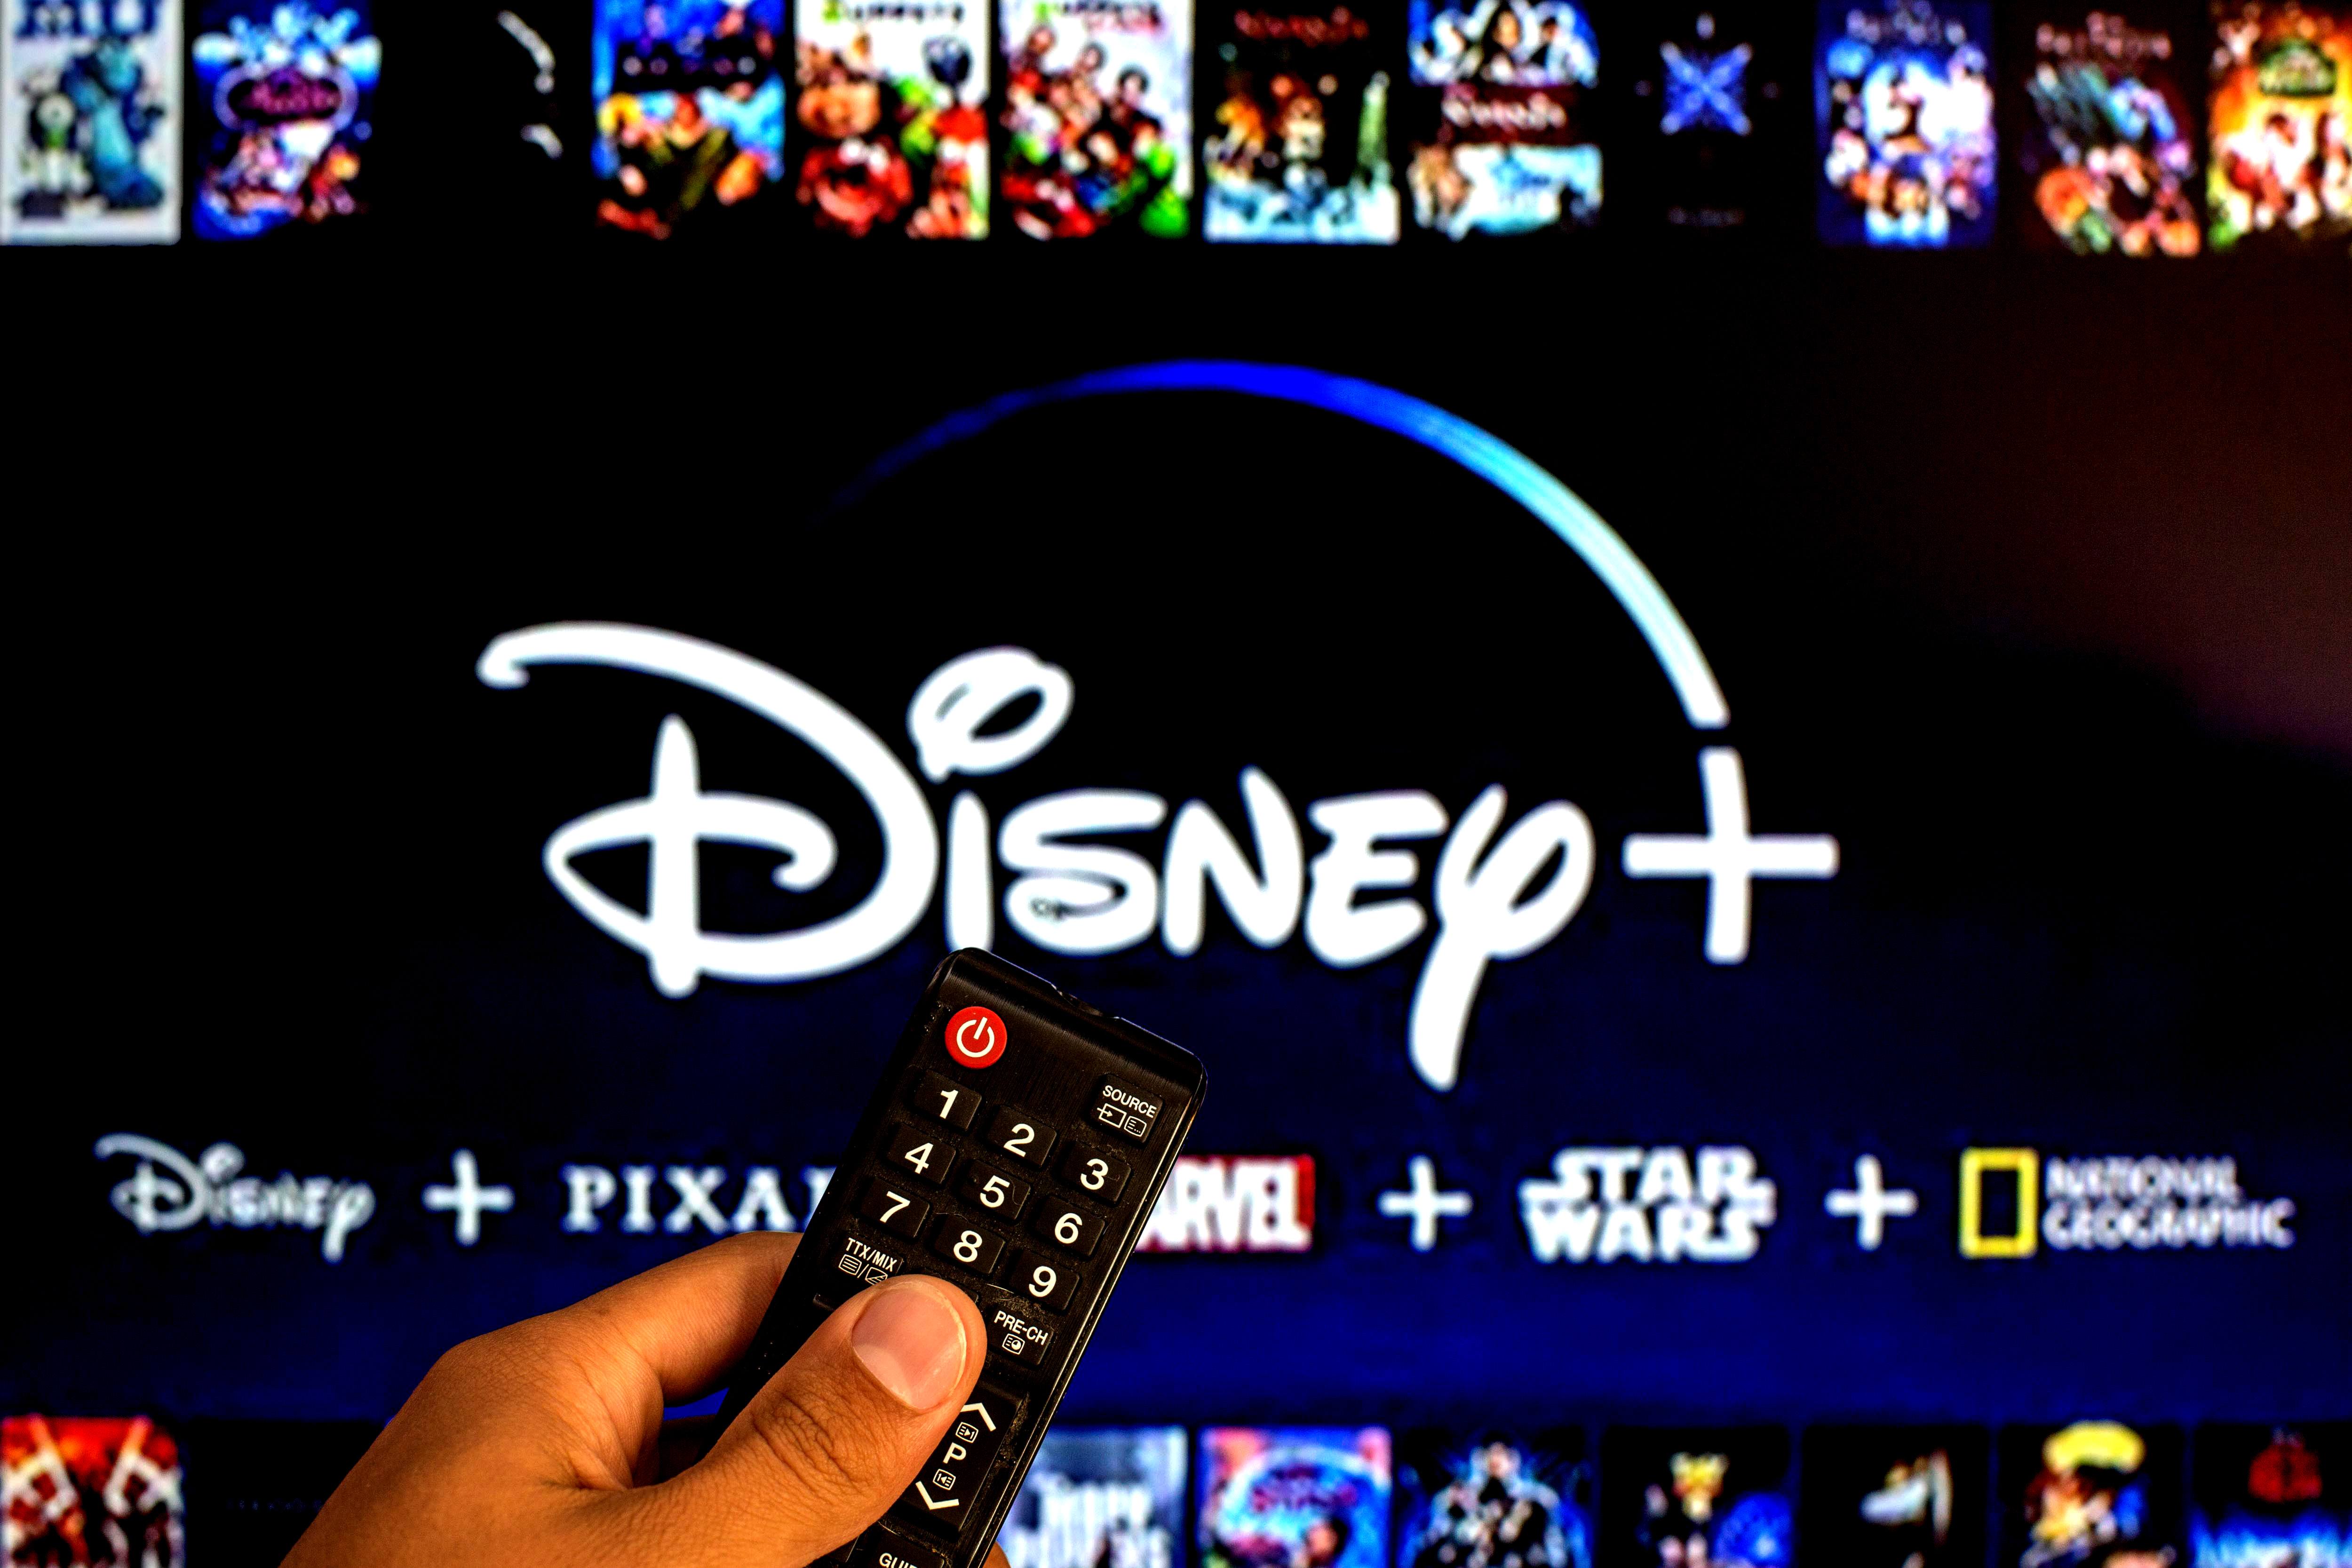 Report: Disney+ Will Have More Subscribers Than Netflix by 2028